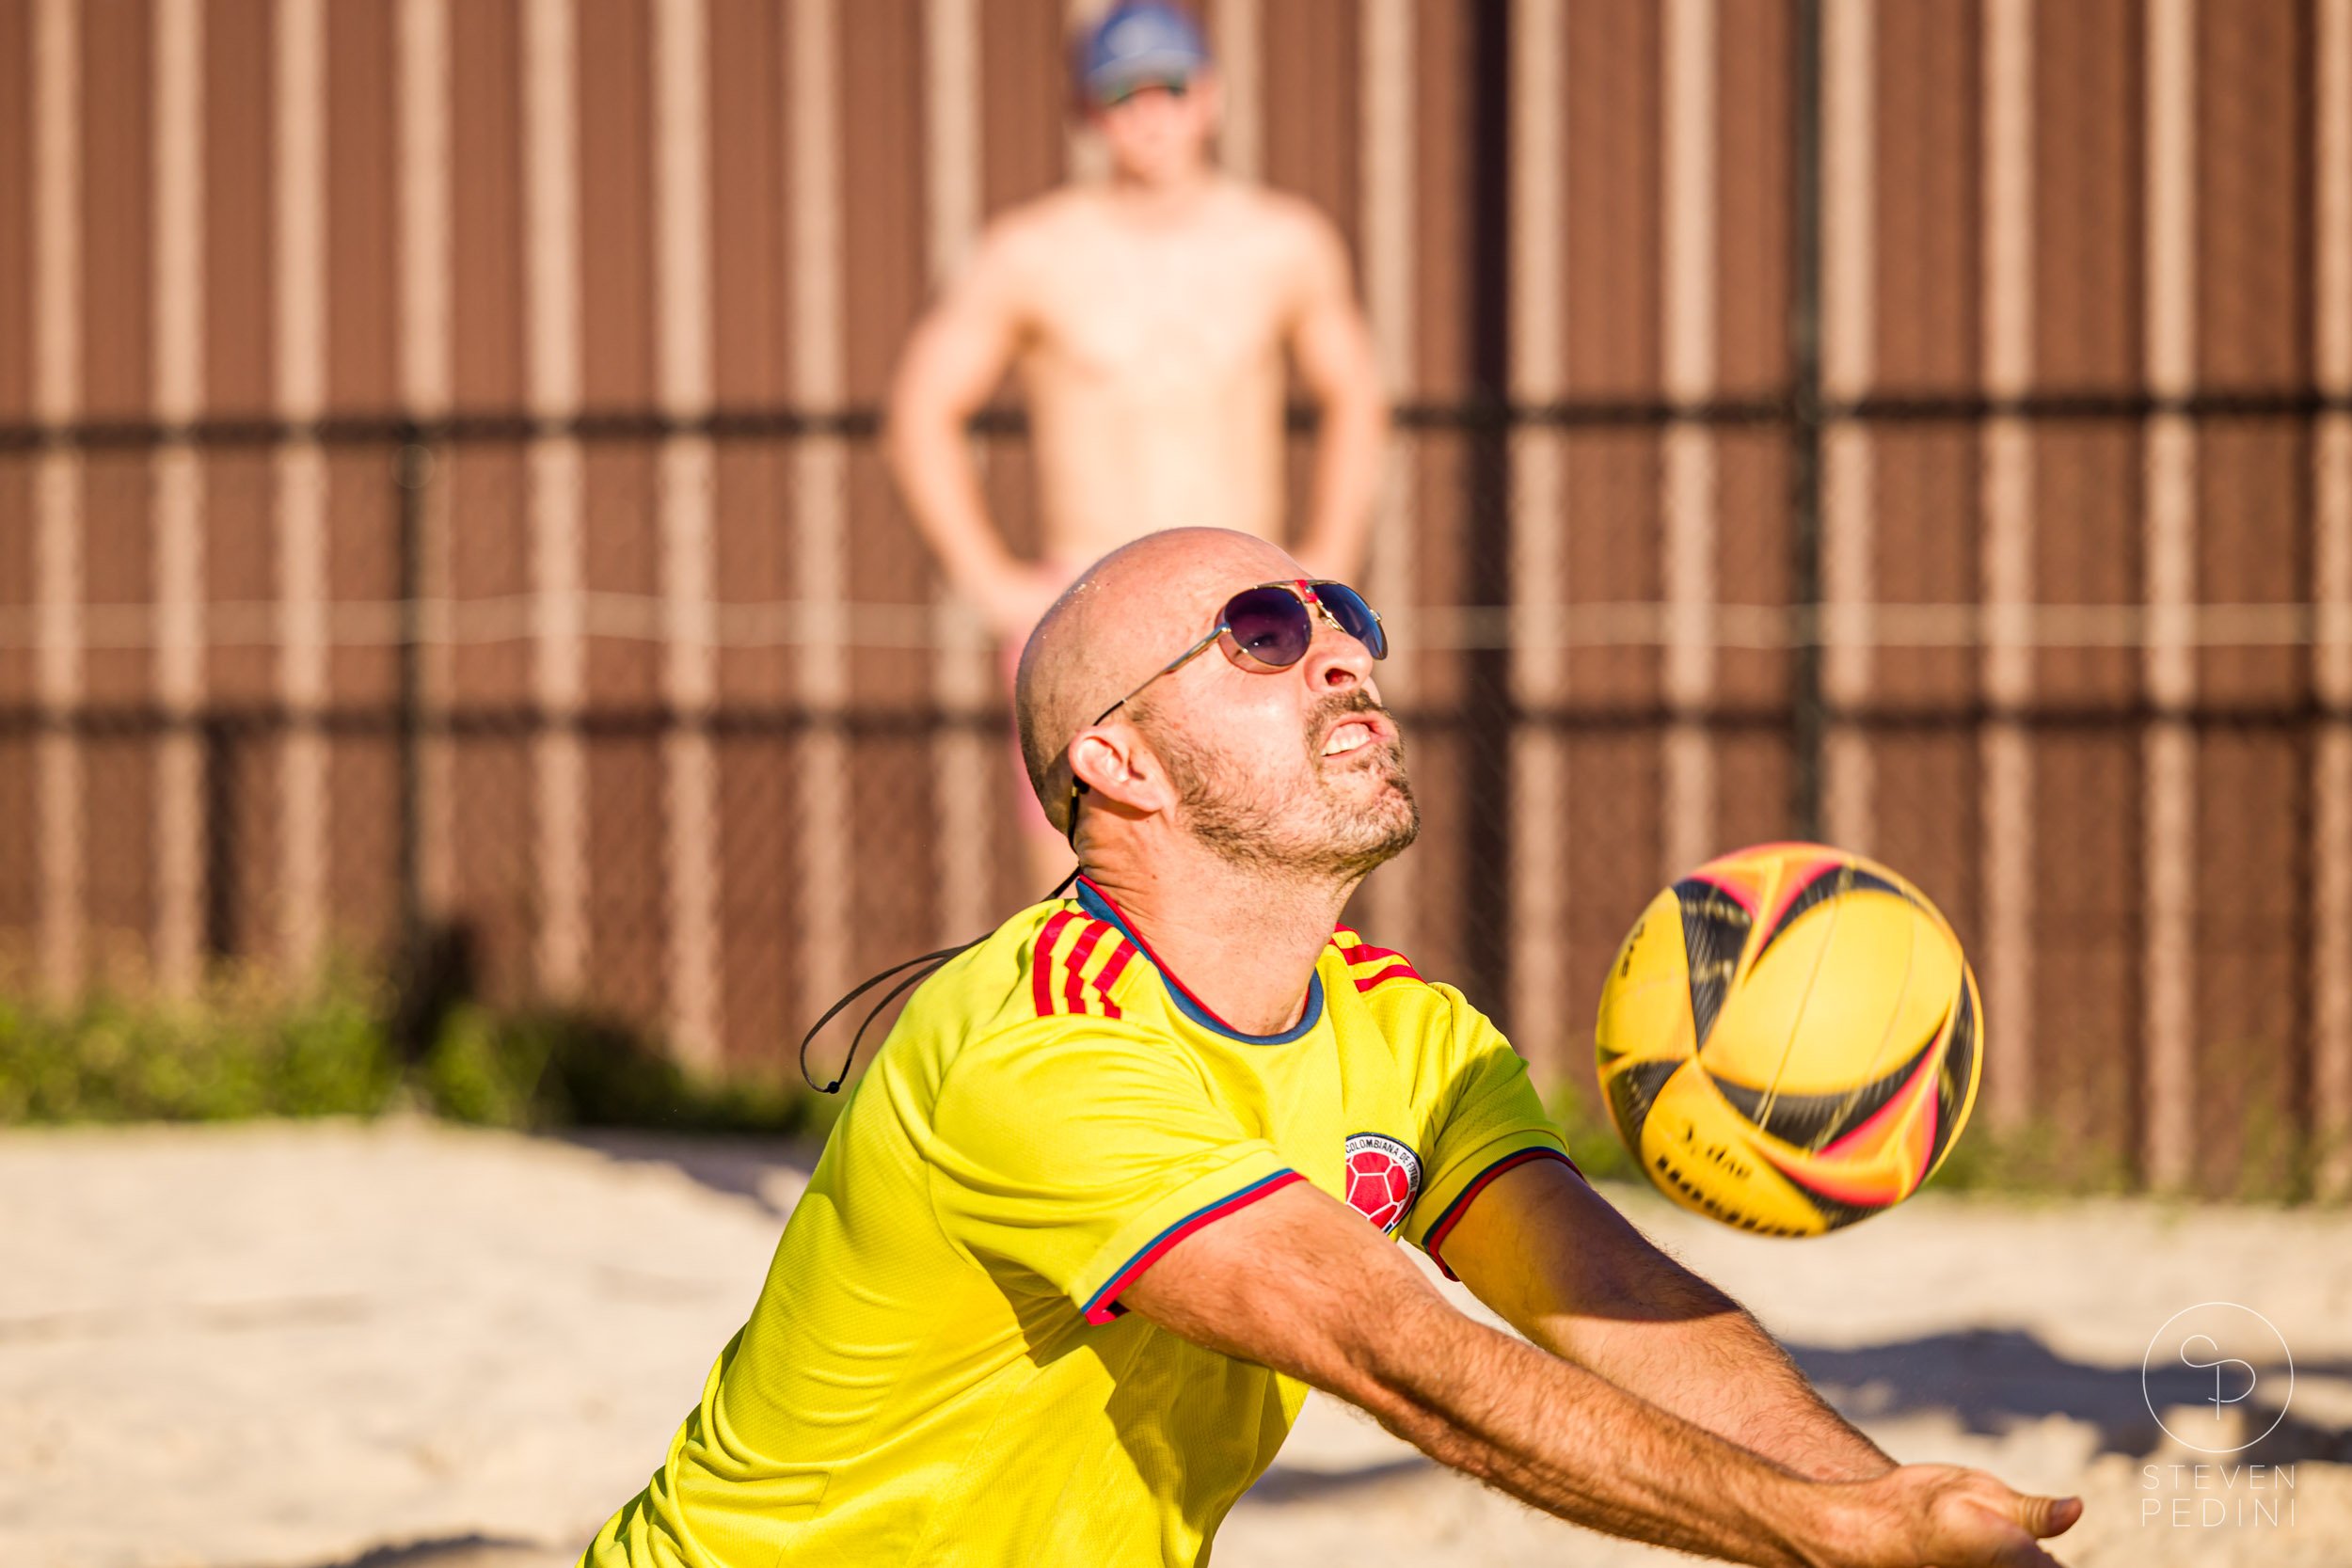 Steven Pedini Photography - Bumpy Pickle - Sand Volleyball - Houston TX - World Cup of Volleyball - 00093.jpg